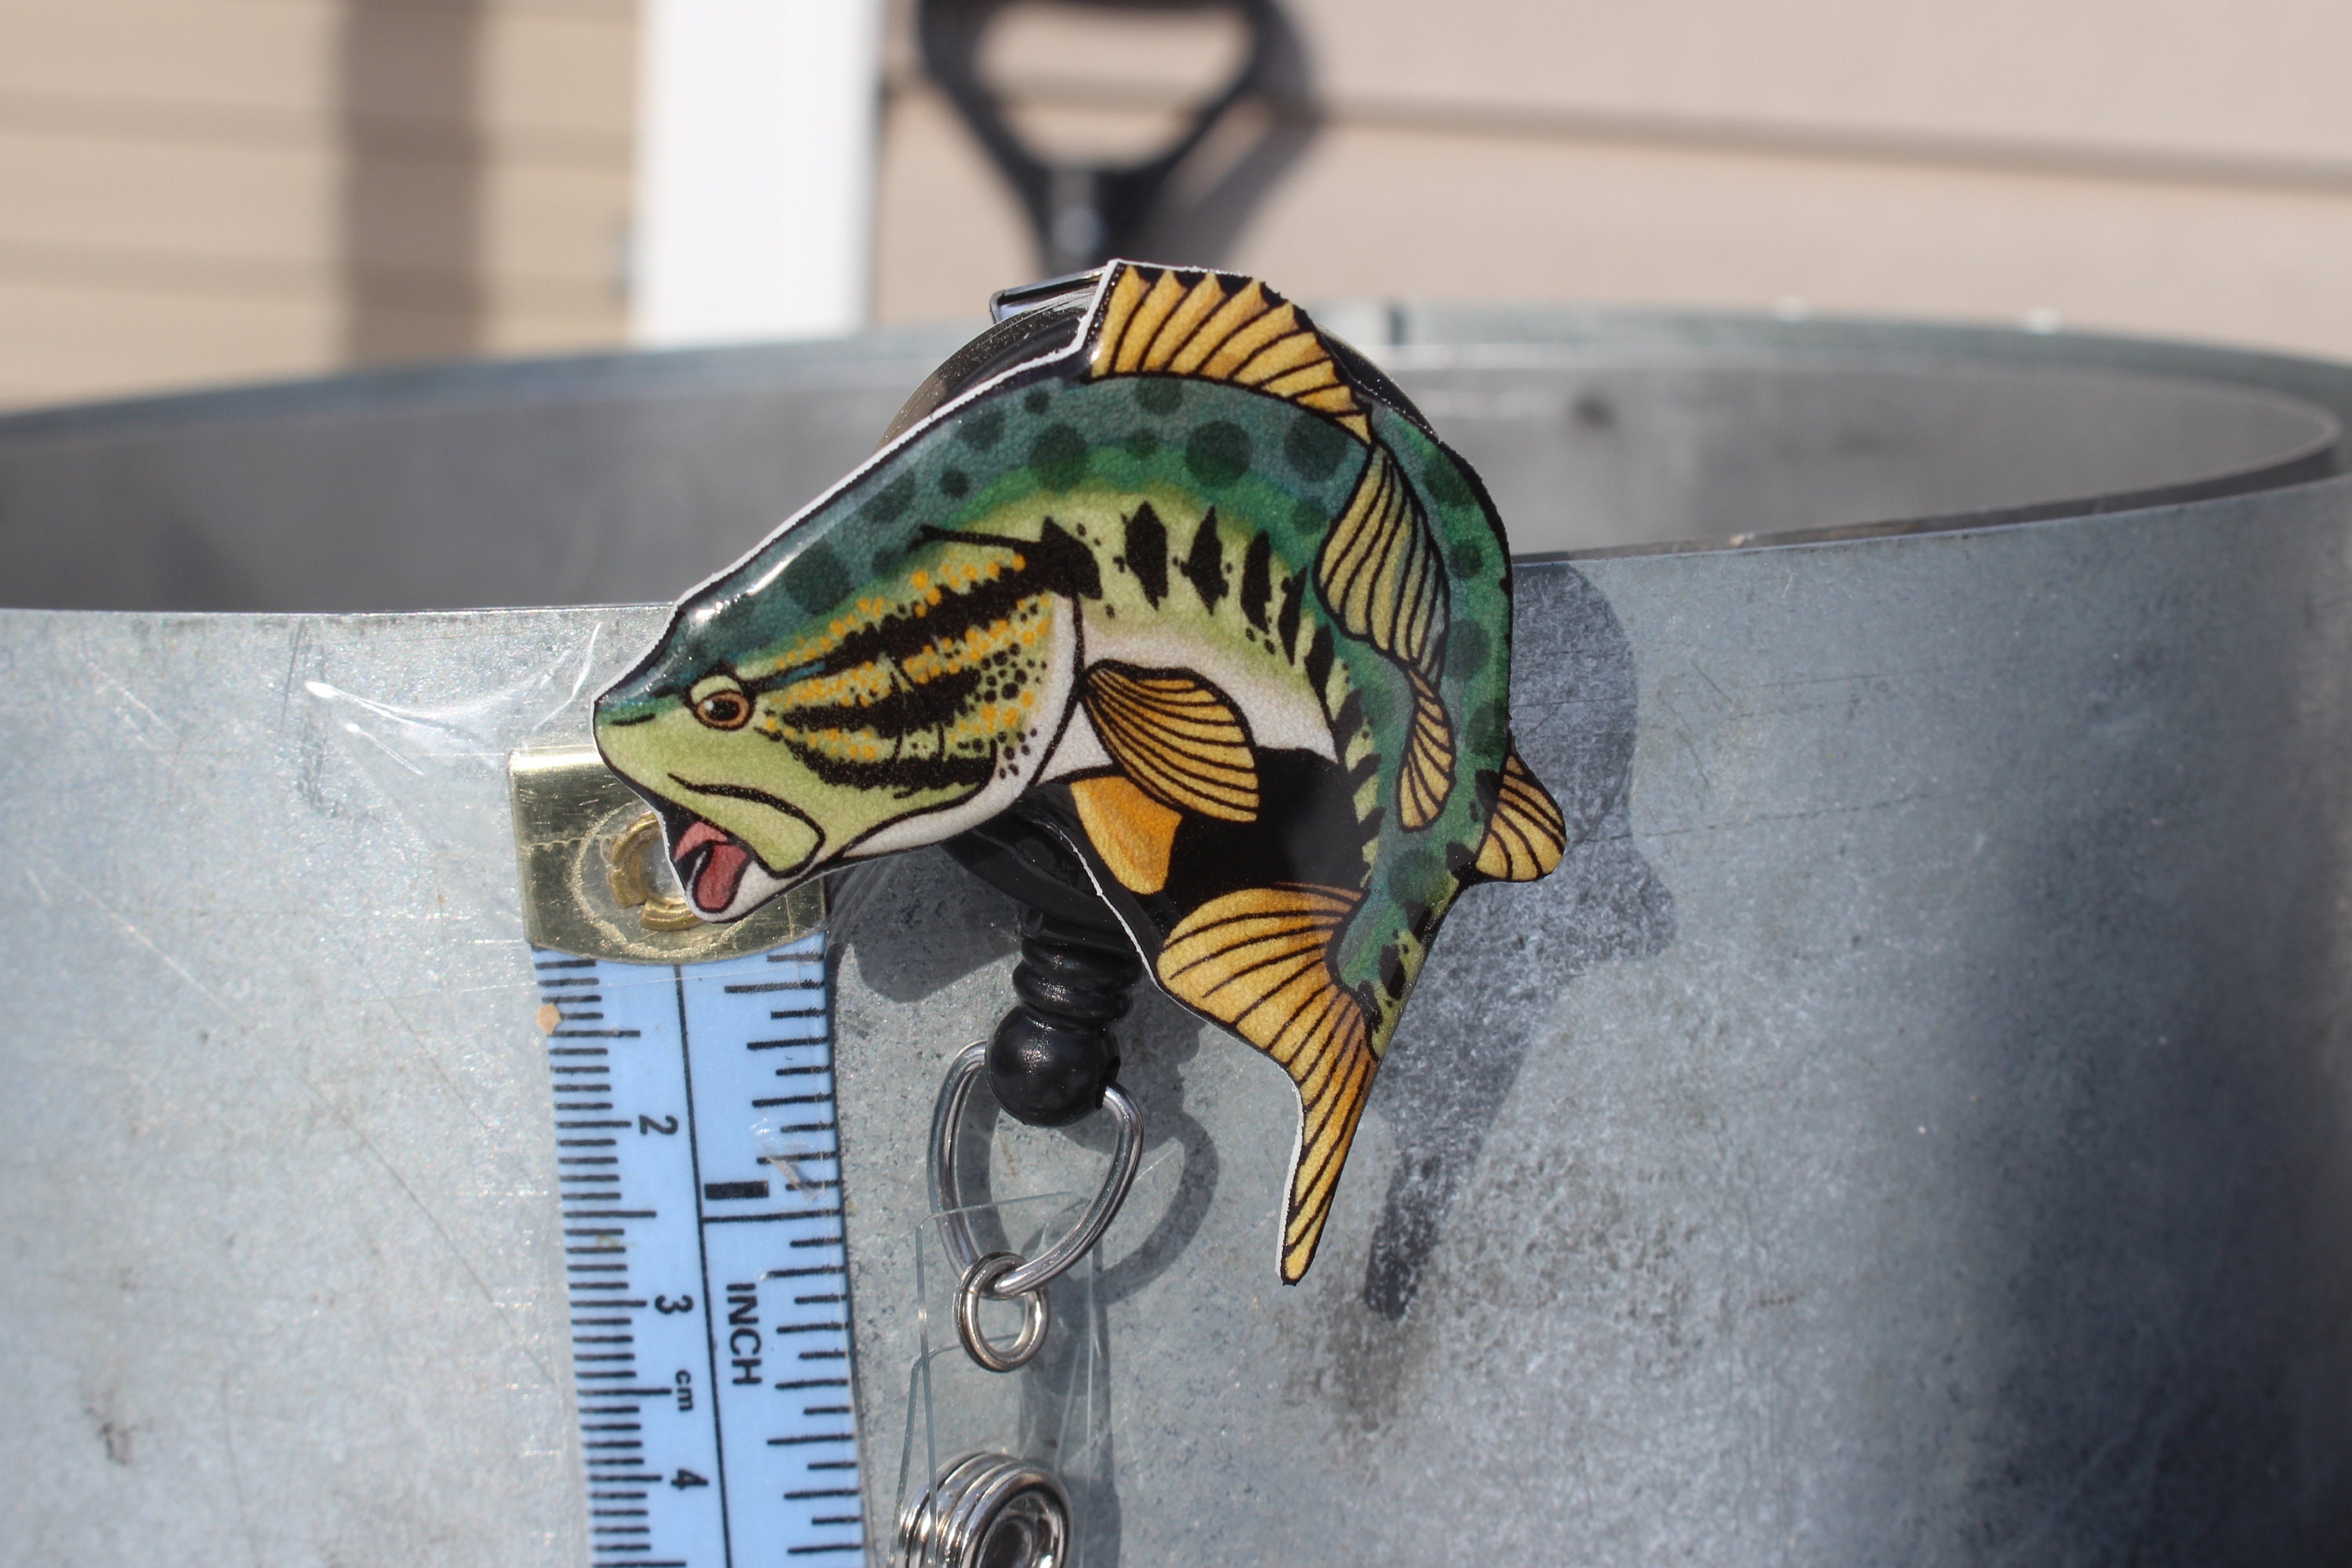 Largemouth Bass Badge Reel ID Holder Gift for Fishing Lovers or Cna HCA Housekeeping Veterinarian Nurse Fish Lover Gift Fish Badge Reel